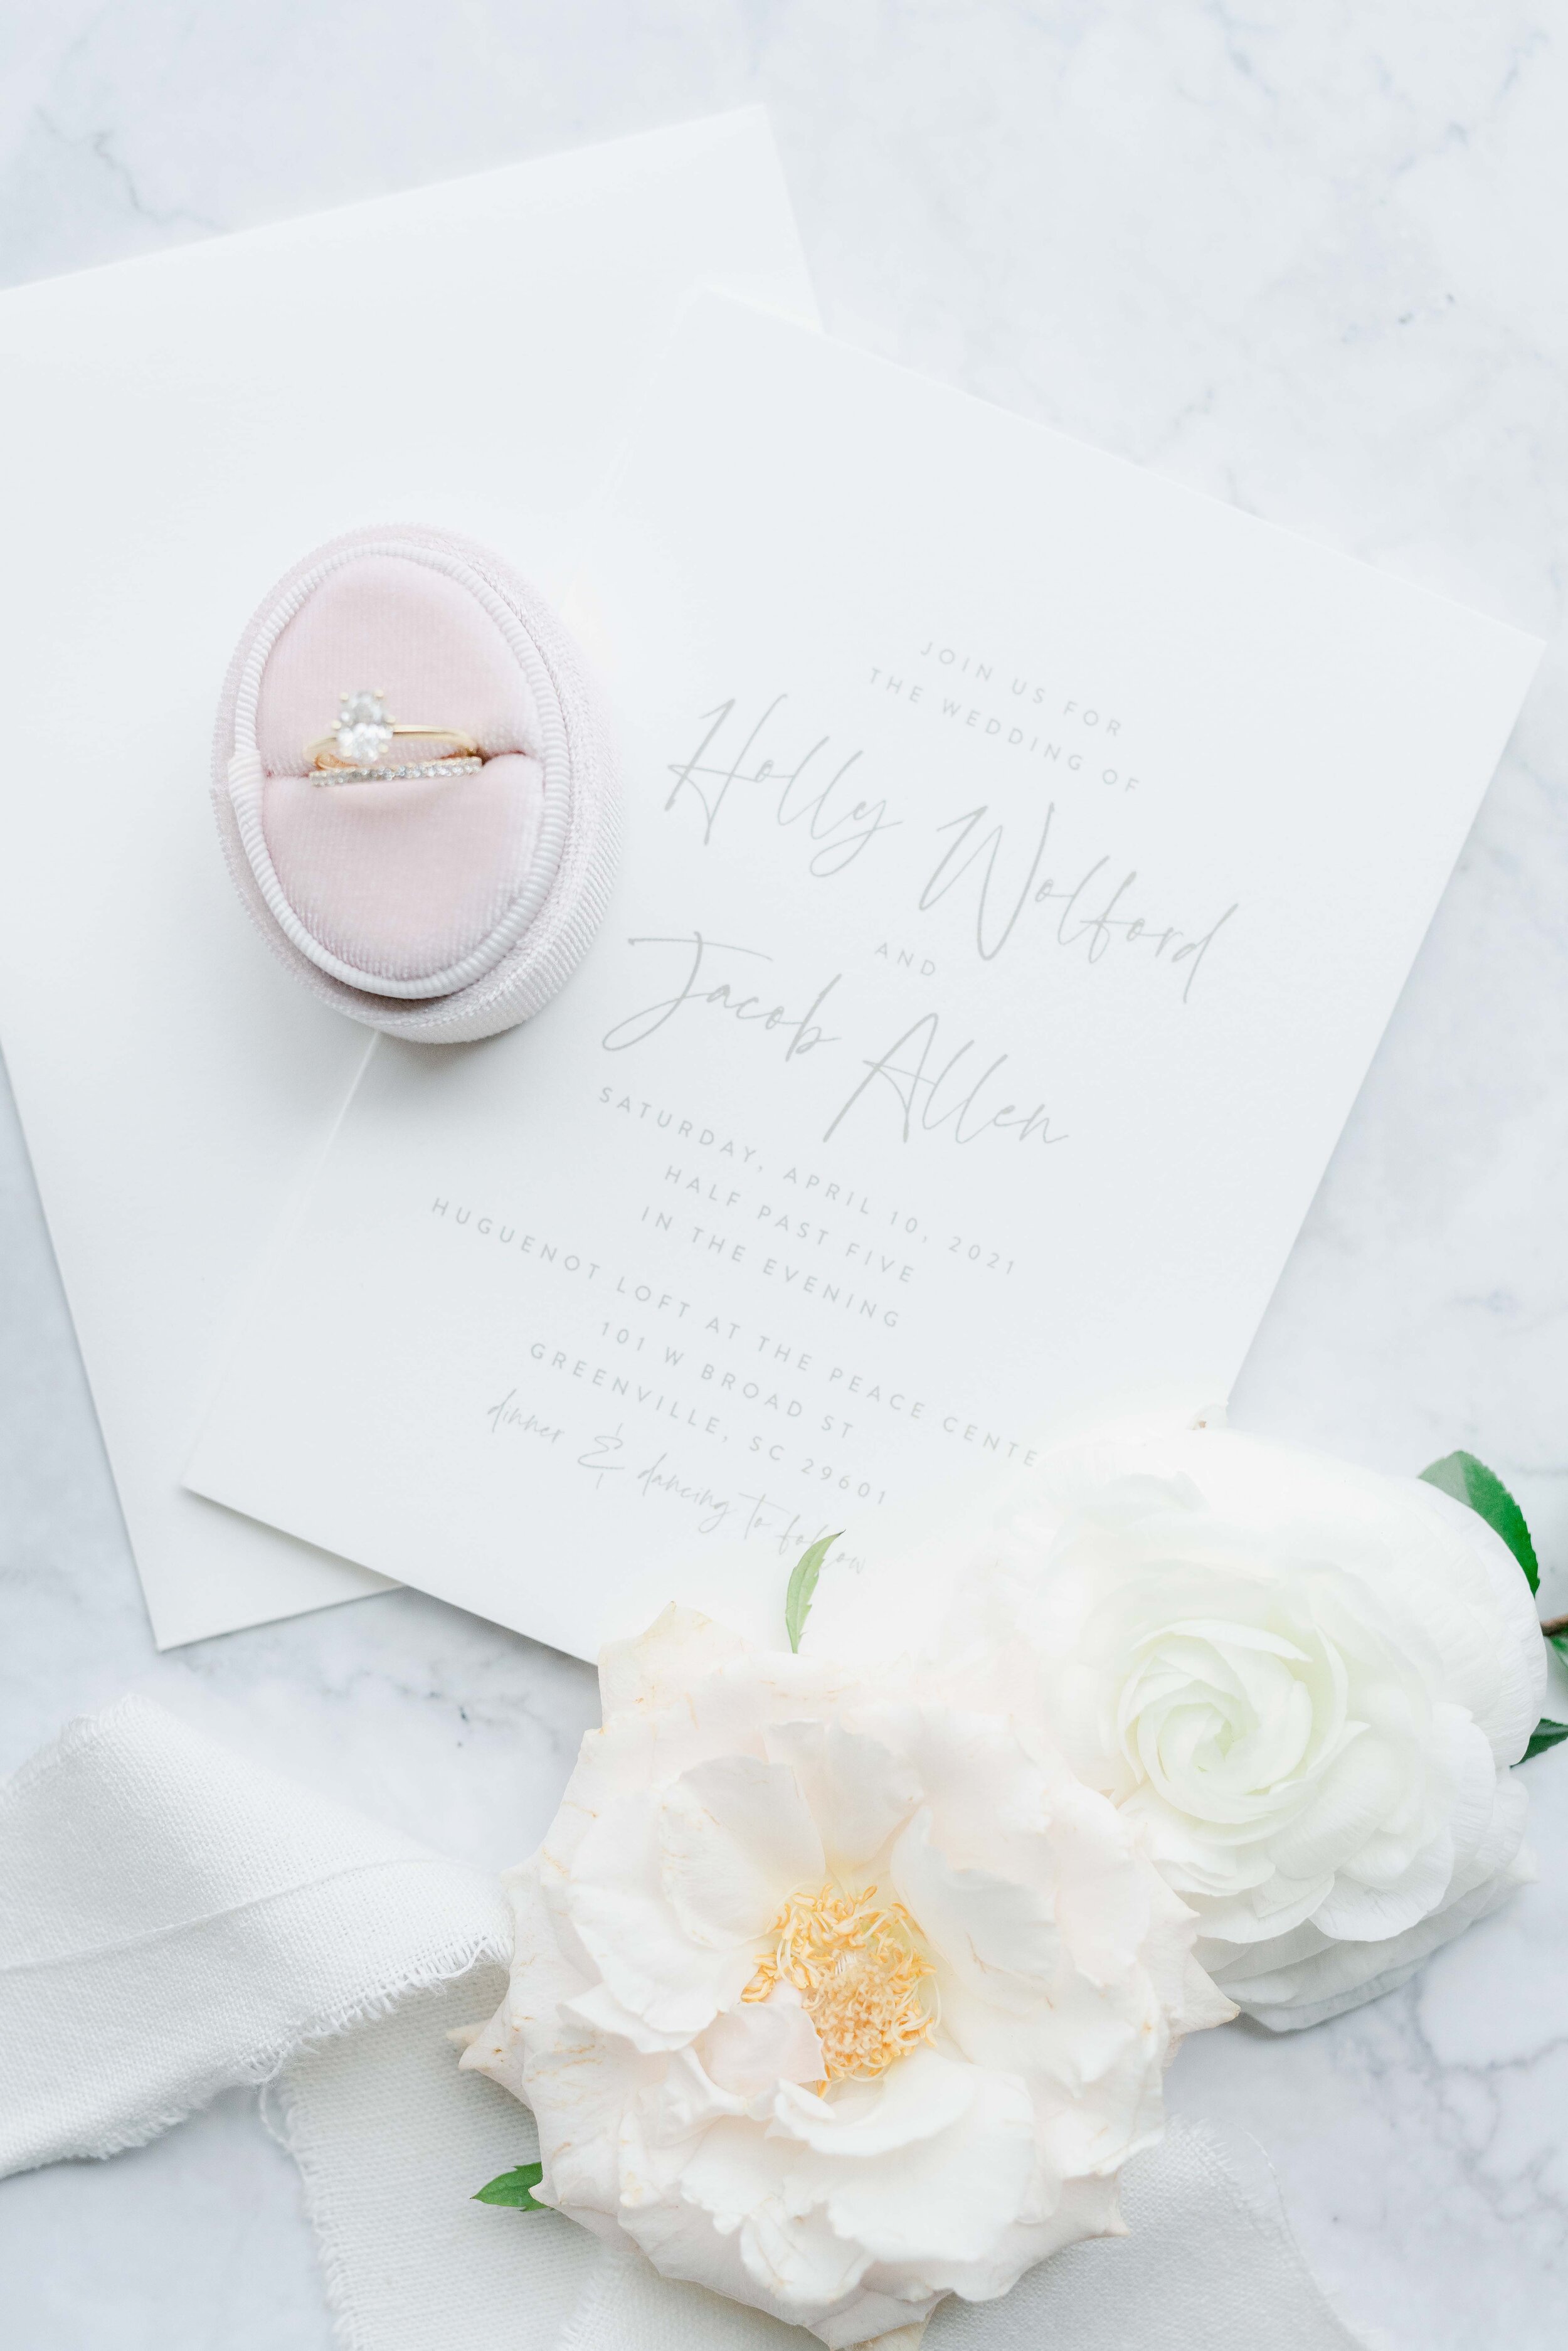 This wedding had a gorgeous soft summer palette of cream, blush, and sage. It was filled with delicate, thoughtful touches.  Designed by florist Rosemary & Finch in Nashville, TN.